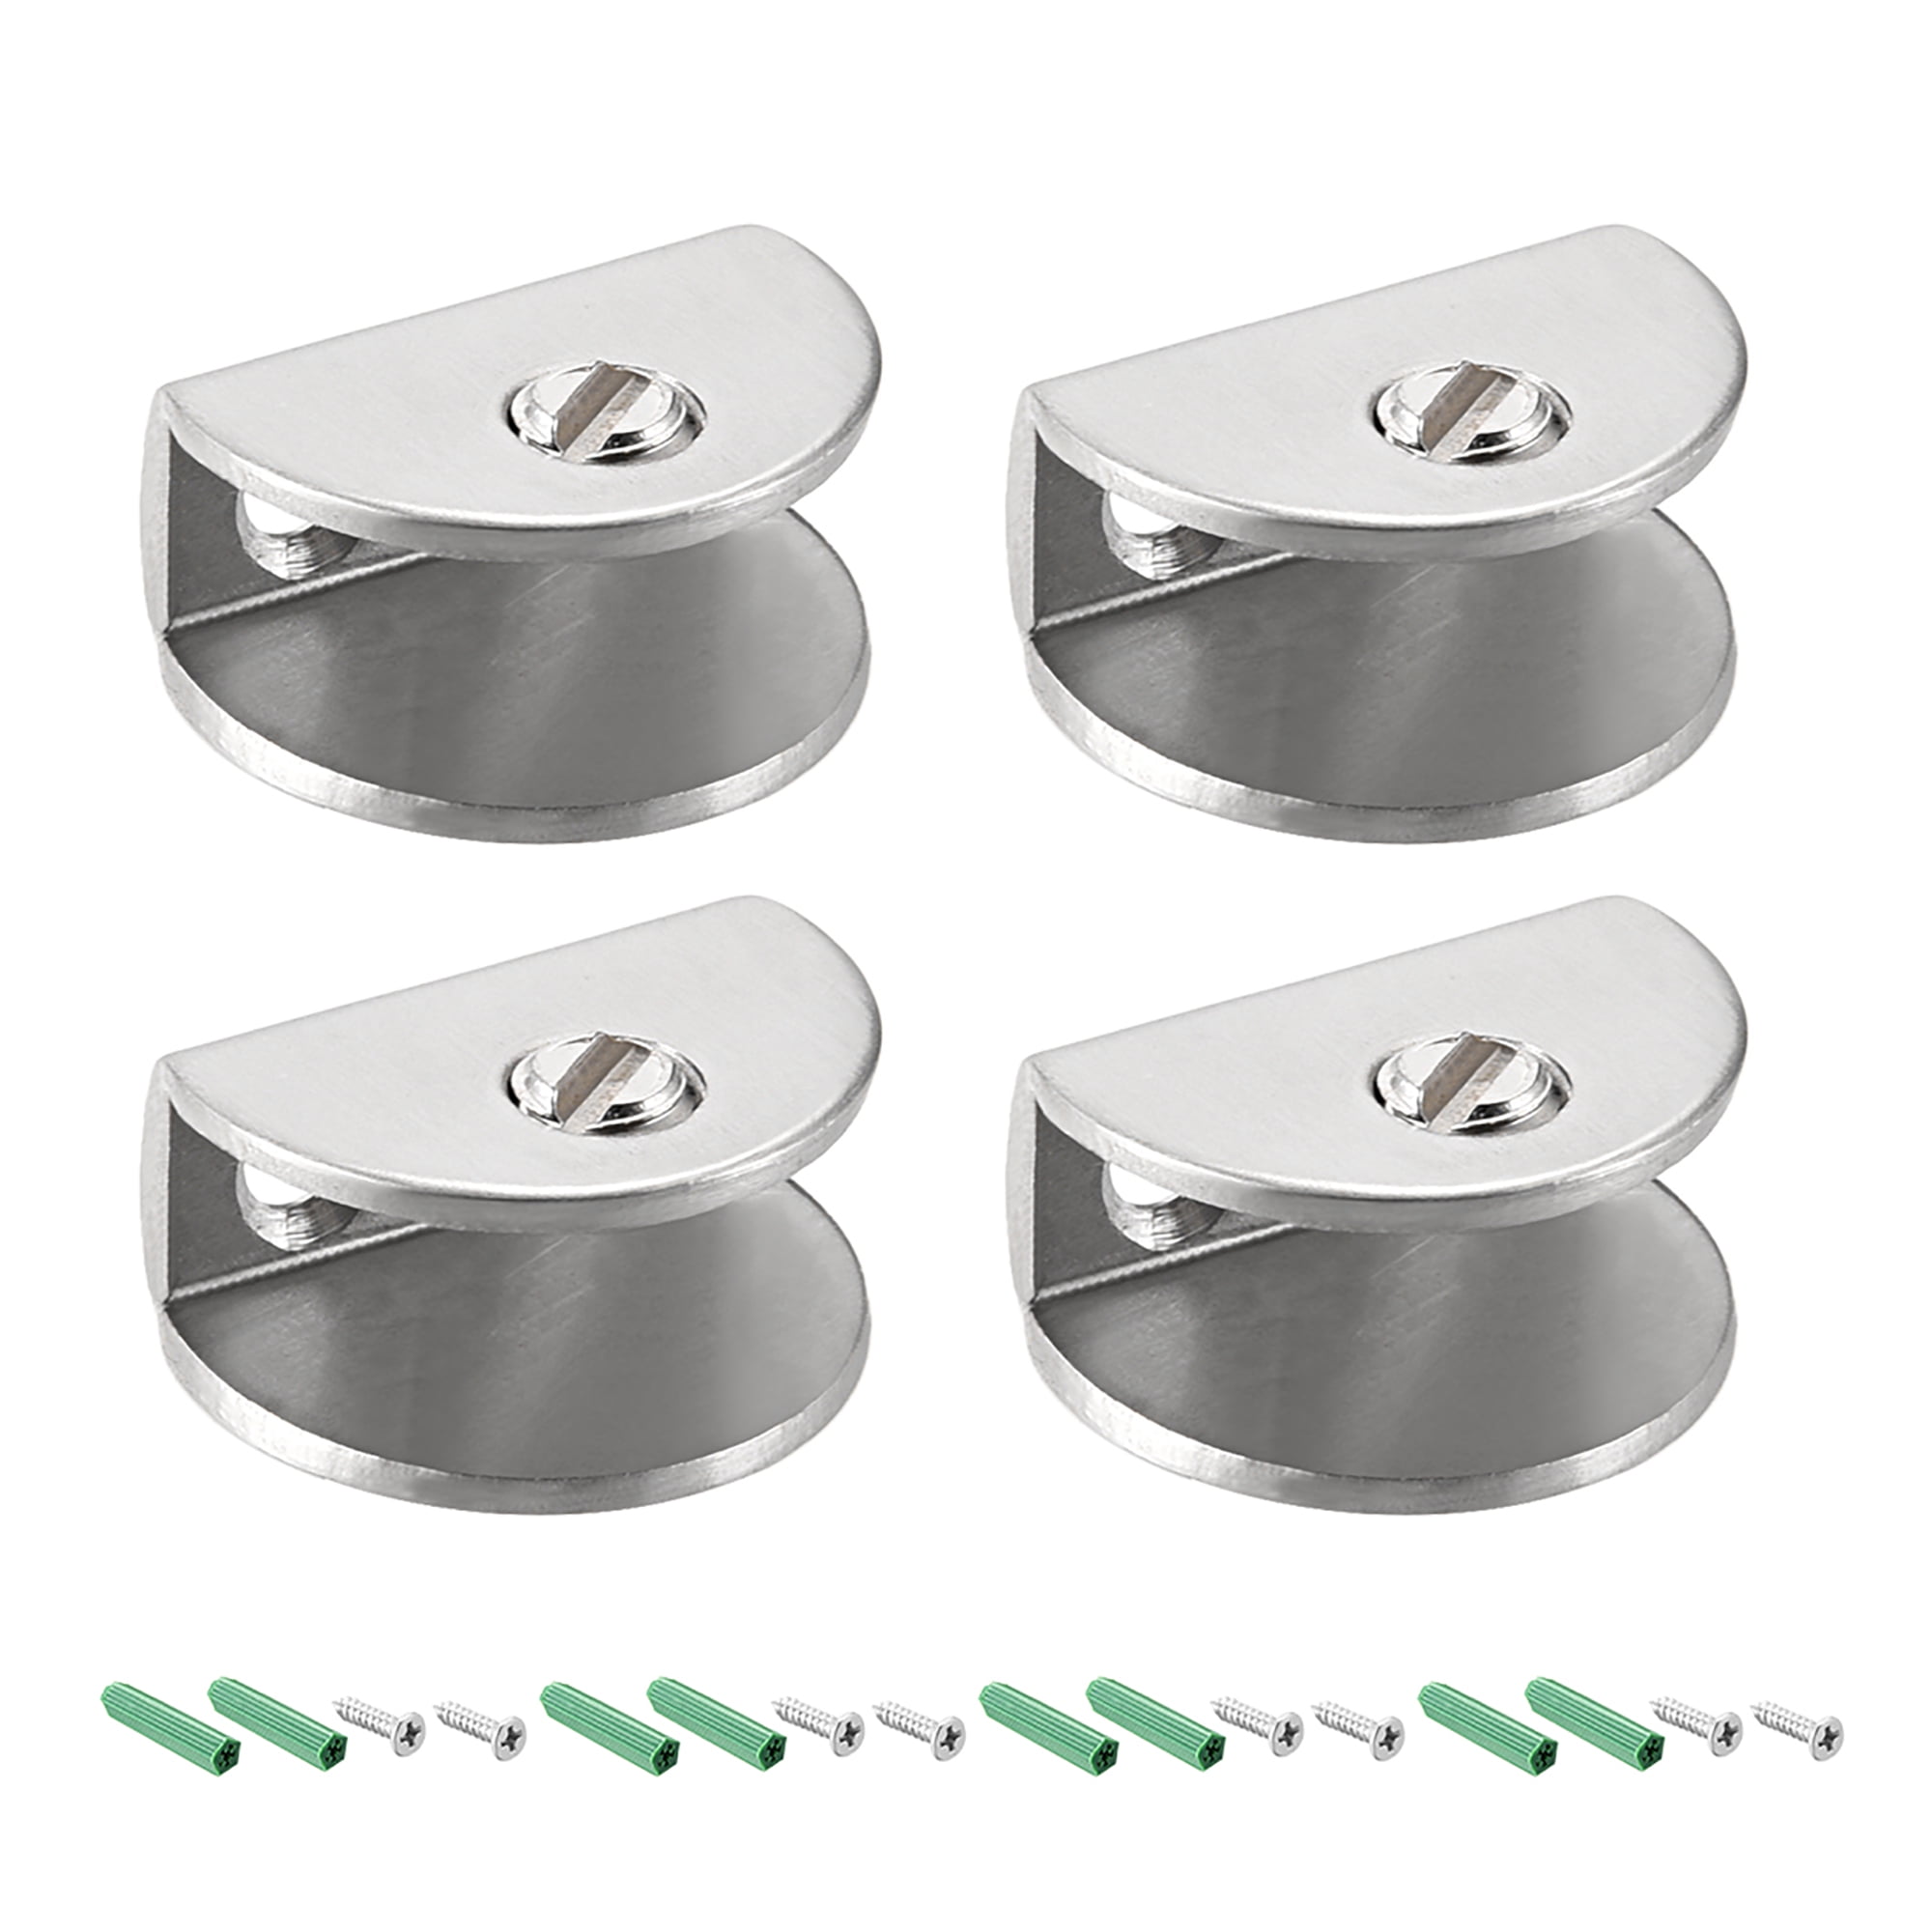 4pcs Small Stainless Steel Glass Clamp Clip Flat Back Bracket Holder 